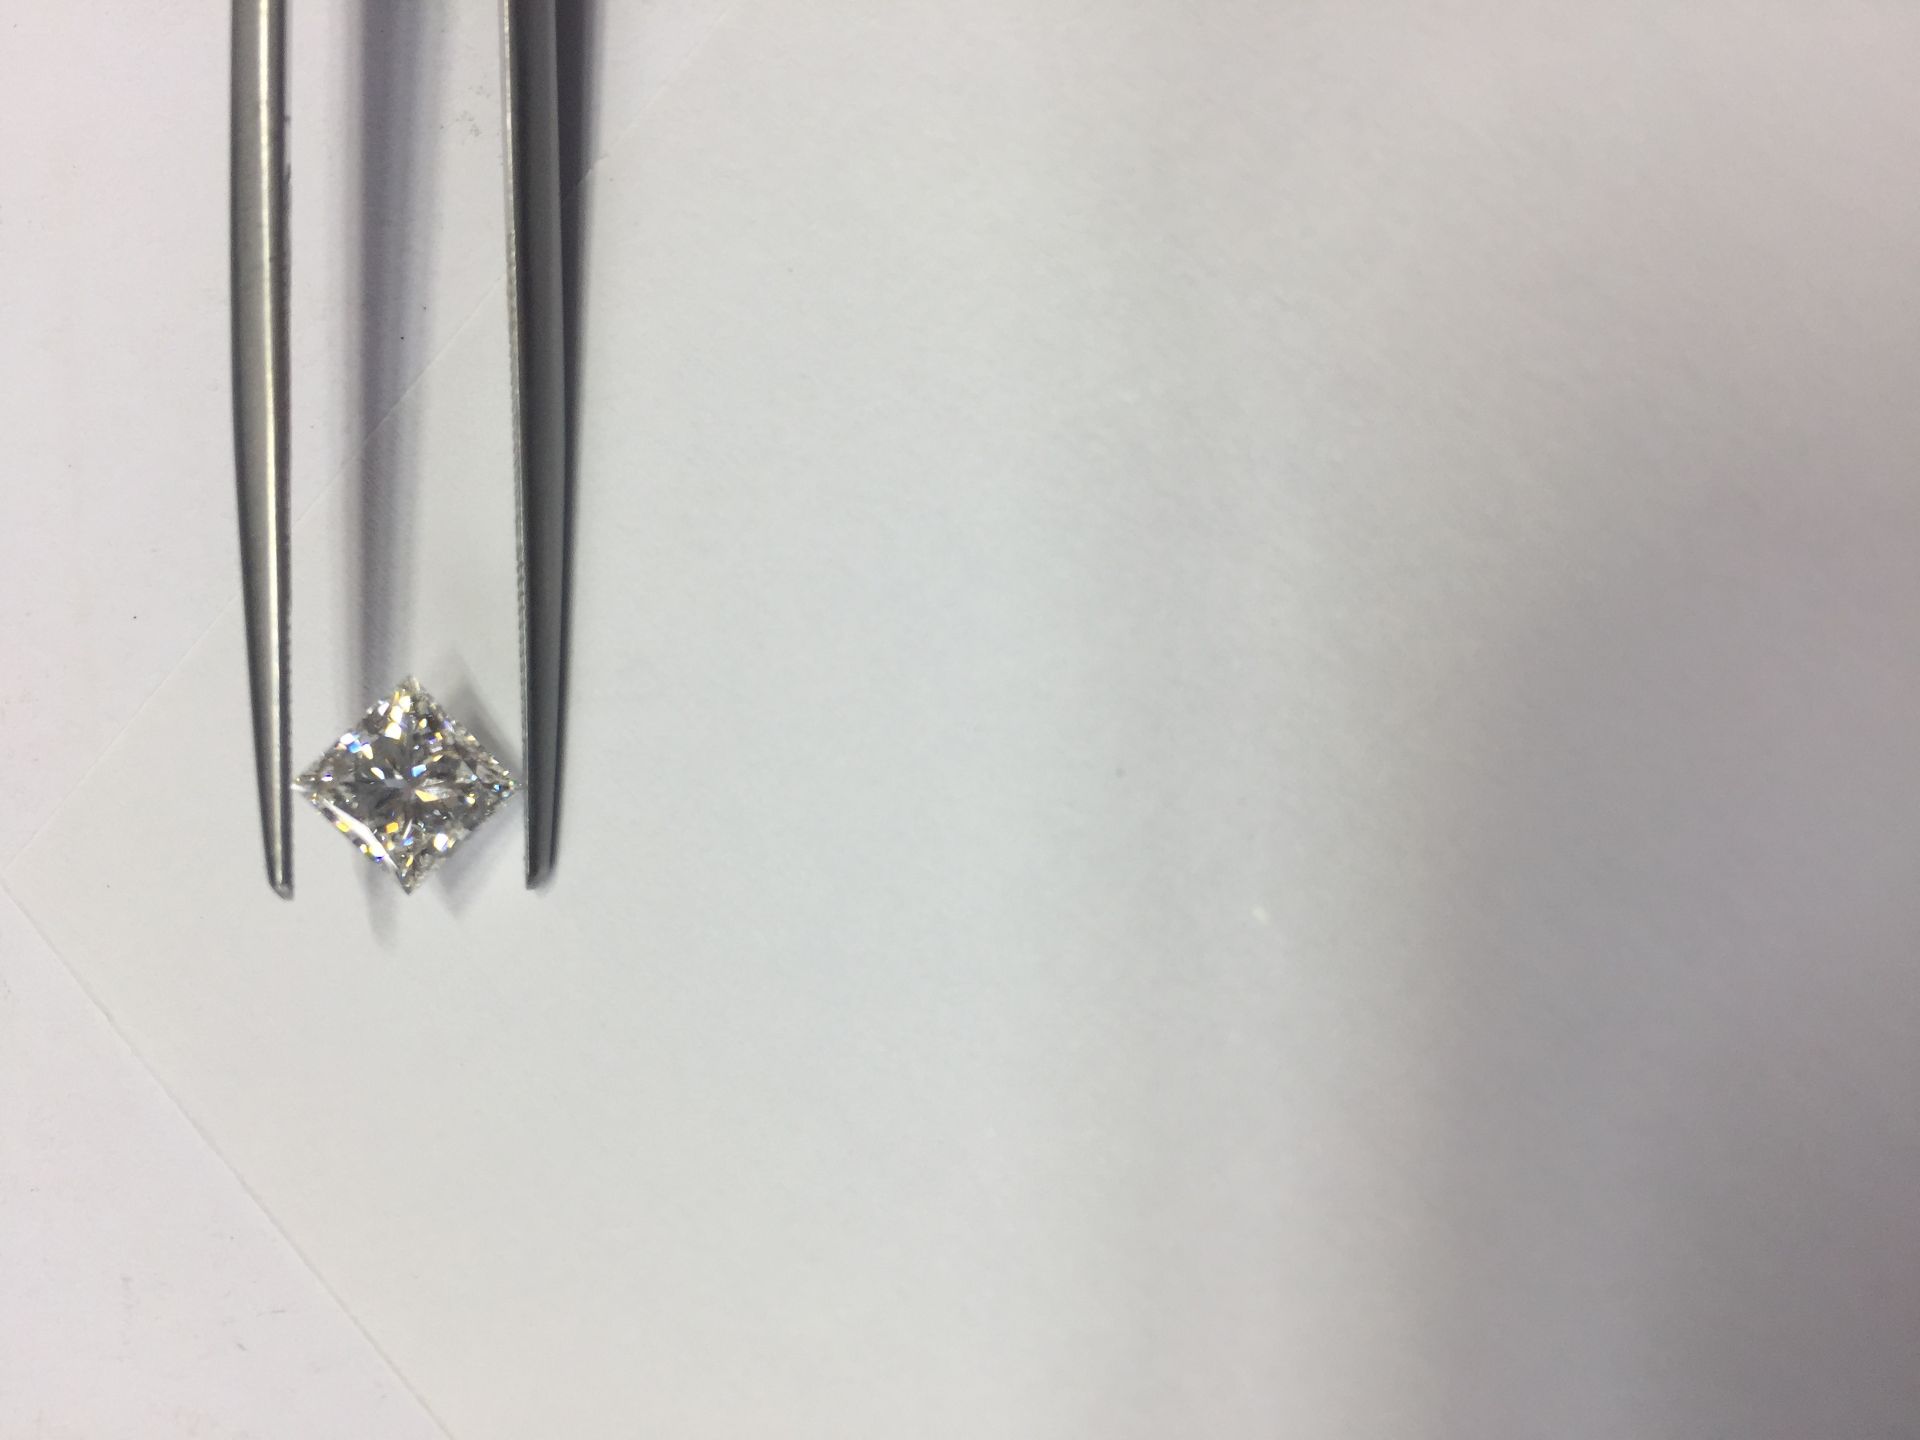 1.01ct princess cut diamond. F colour, SI1 clarity. No certification. Can be used for ring or - Image 3 of 4